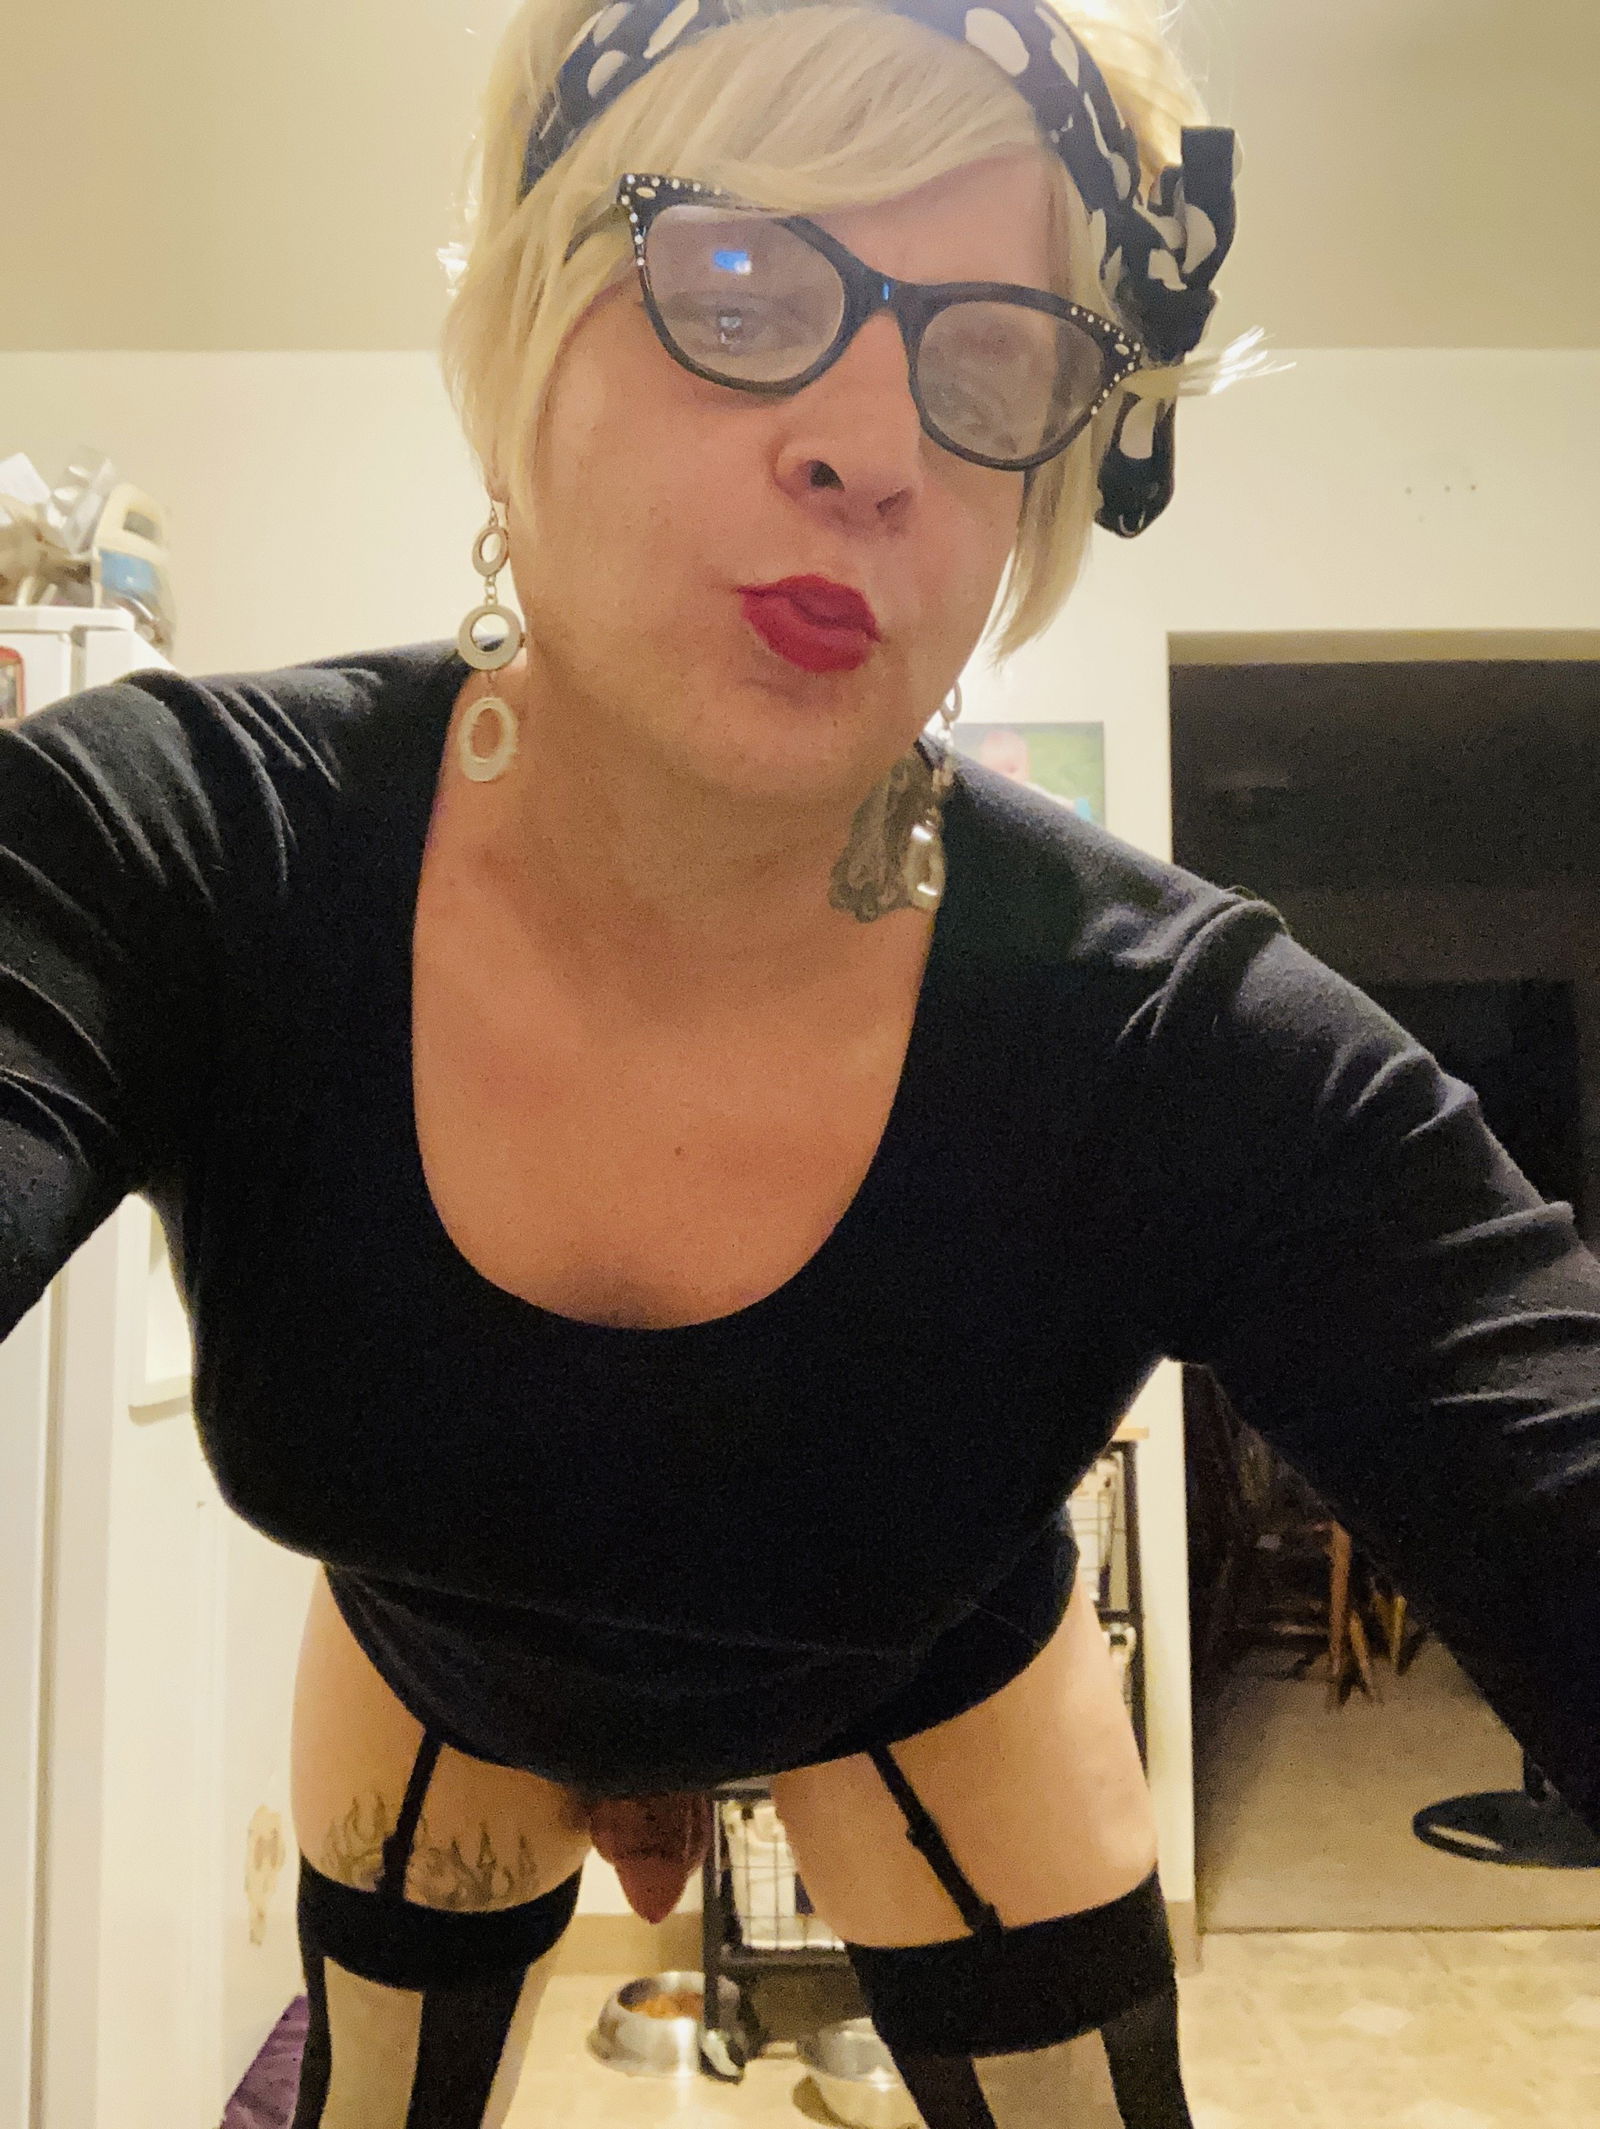 Watch the Photo by DangerMarcy with the username @DangerMarcy, who is a verified user, posted on July 3, 2022. The post is about the topic Hot Shemale Pics. and the text says 'Random Sissy Pics of Myself. Send me all the cock pics you want🥰
I love random cock pics, as I am addicted to cock and yummy cum like a proper sissy whore💋
#transwoman #tgirl #transgender #sissyslut #sissywhore #ilovecock #slut #whore #gay #bisexual..'